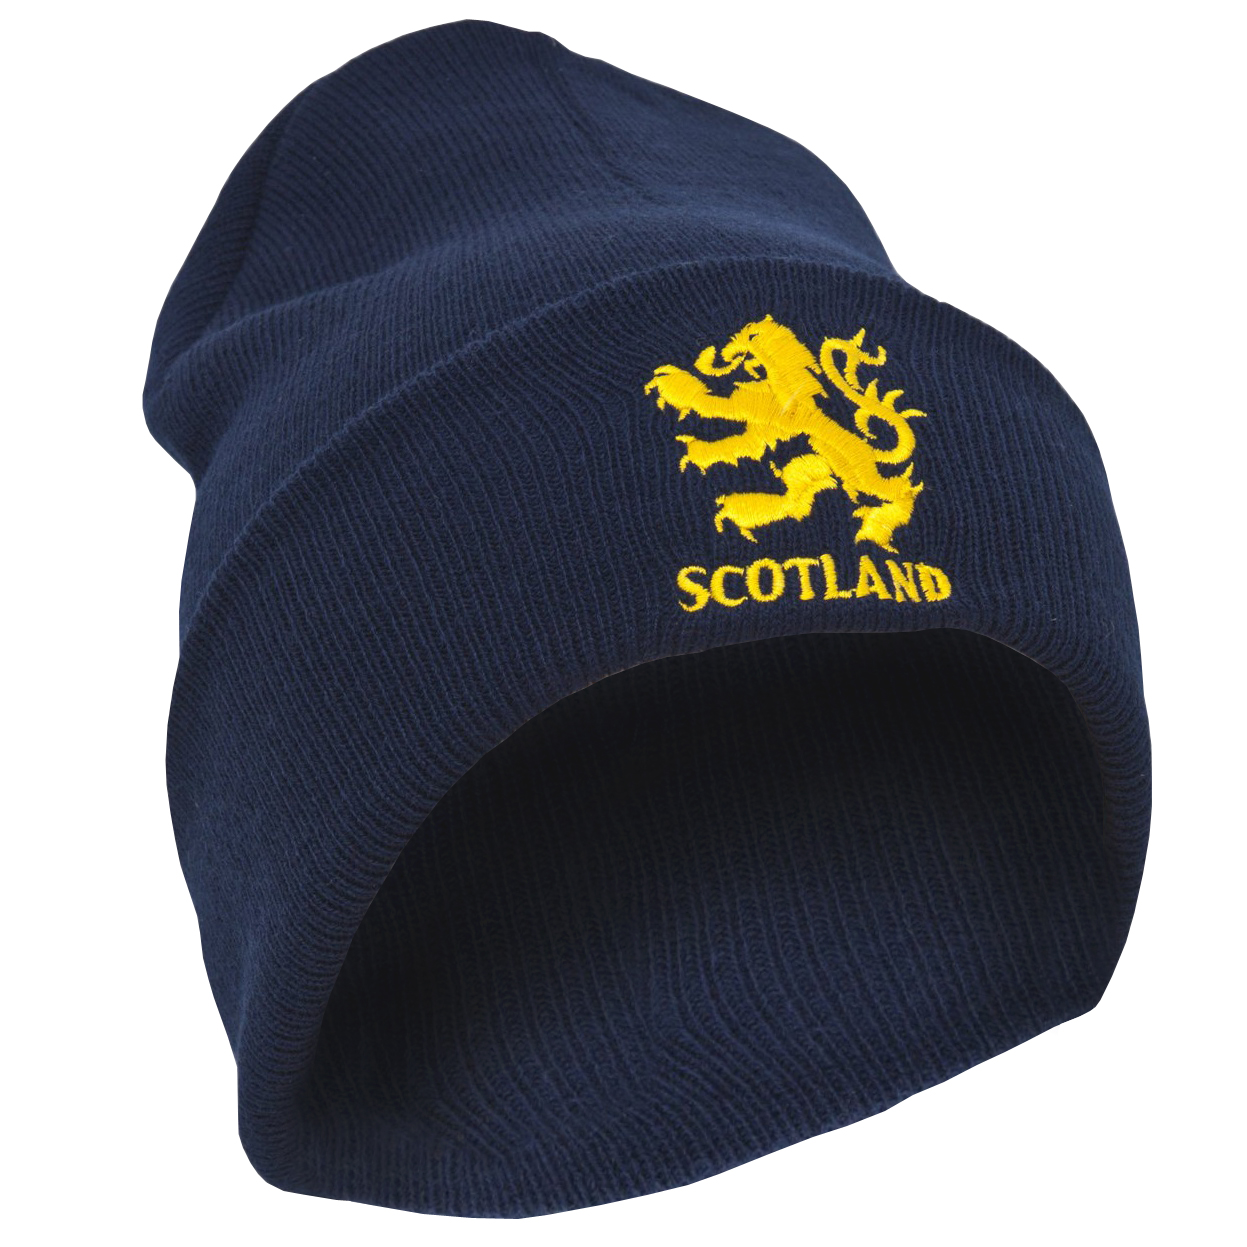 Mens Scotland Lion Design Embroidered Winter Beanie Hat - image 1 of 2